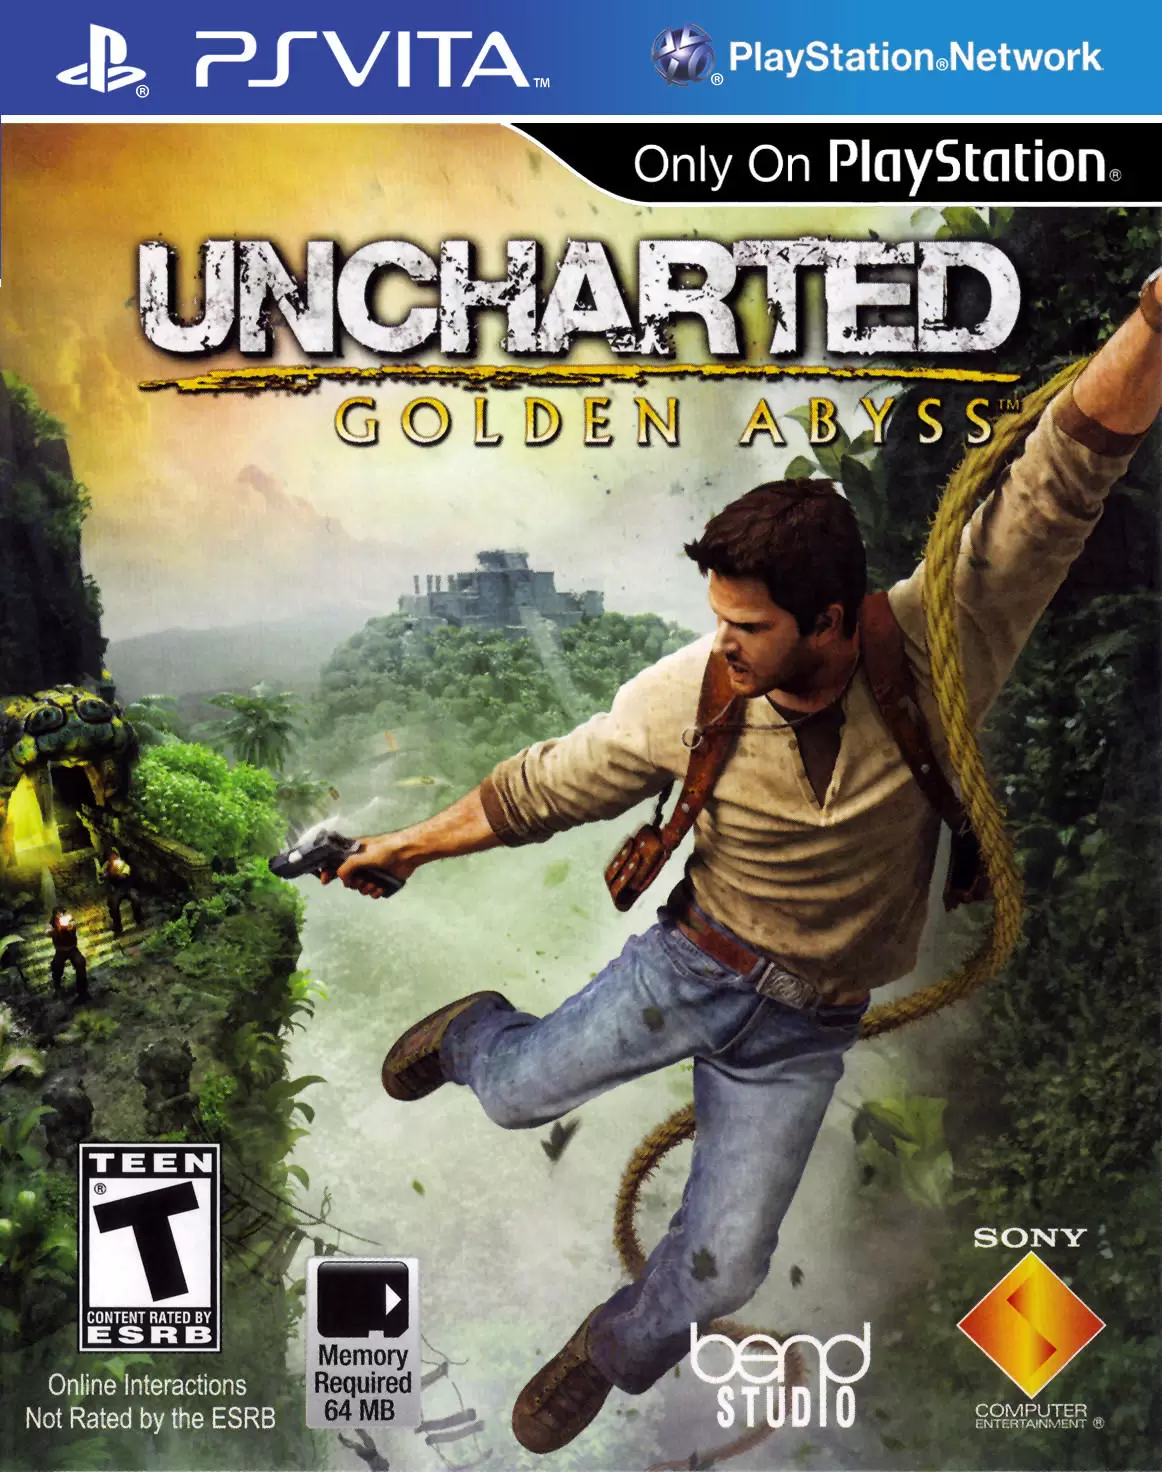 PS Vita Games - Uncharted Golden Abyss